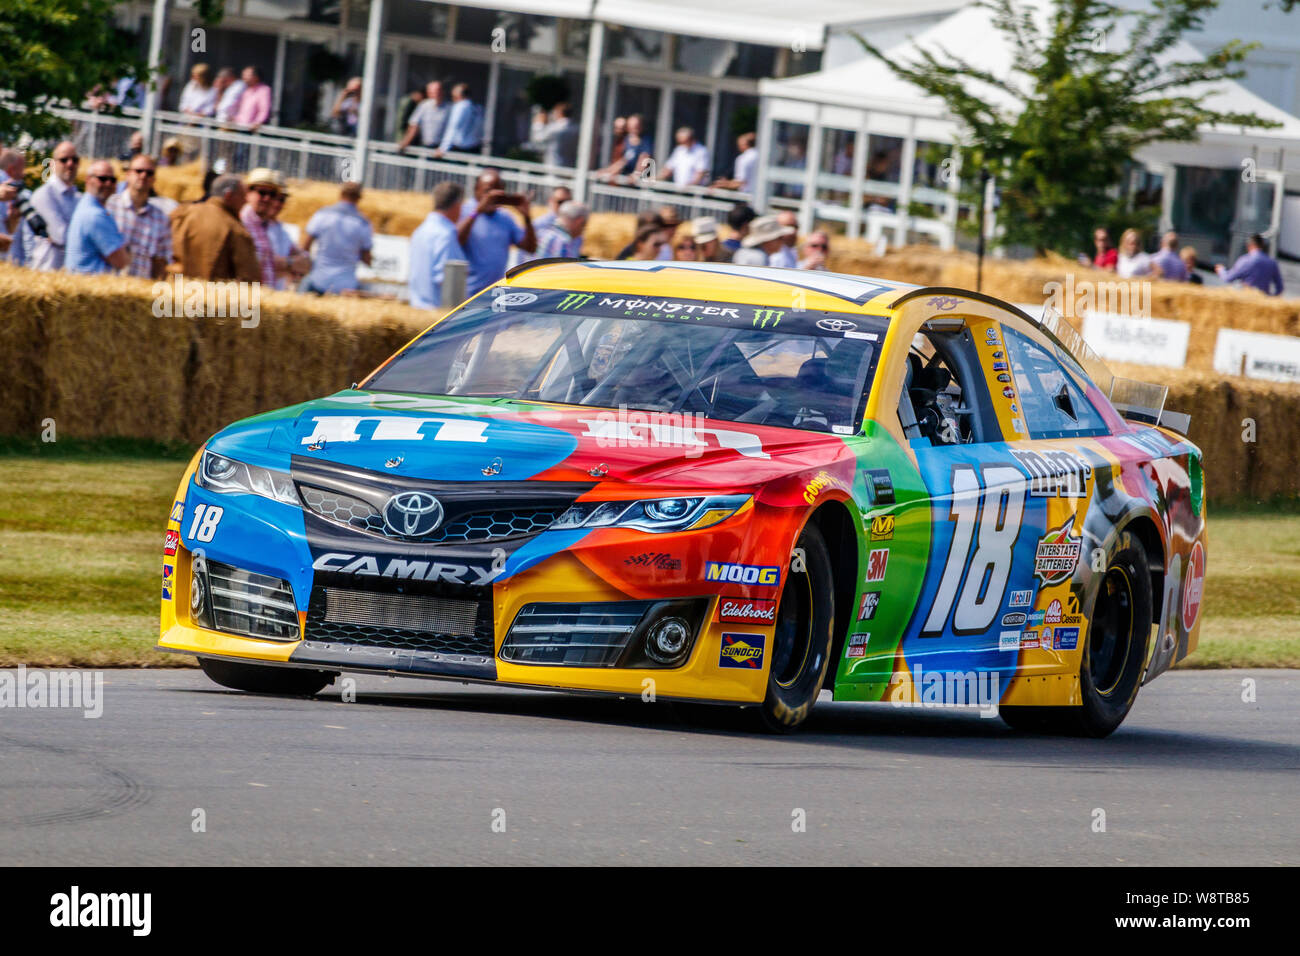 2014 Toyota Camry NASCAR with driver Anthony Reid in the M&M livery at the 2019 Goodwood Festival of Speed, Sussex, UK Stock Photo